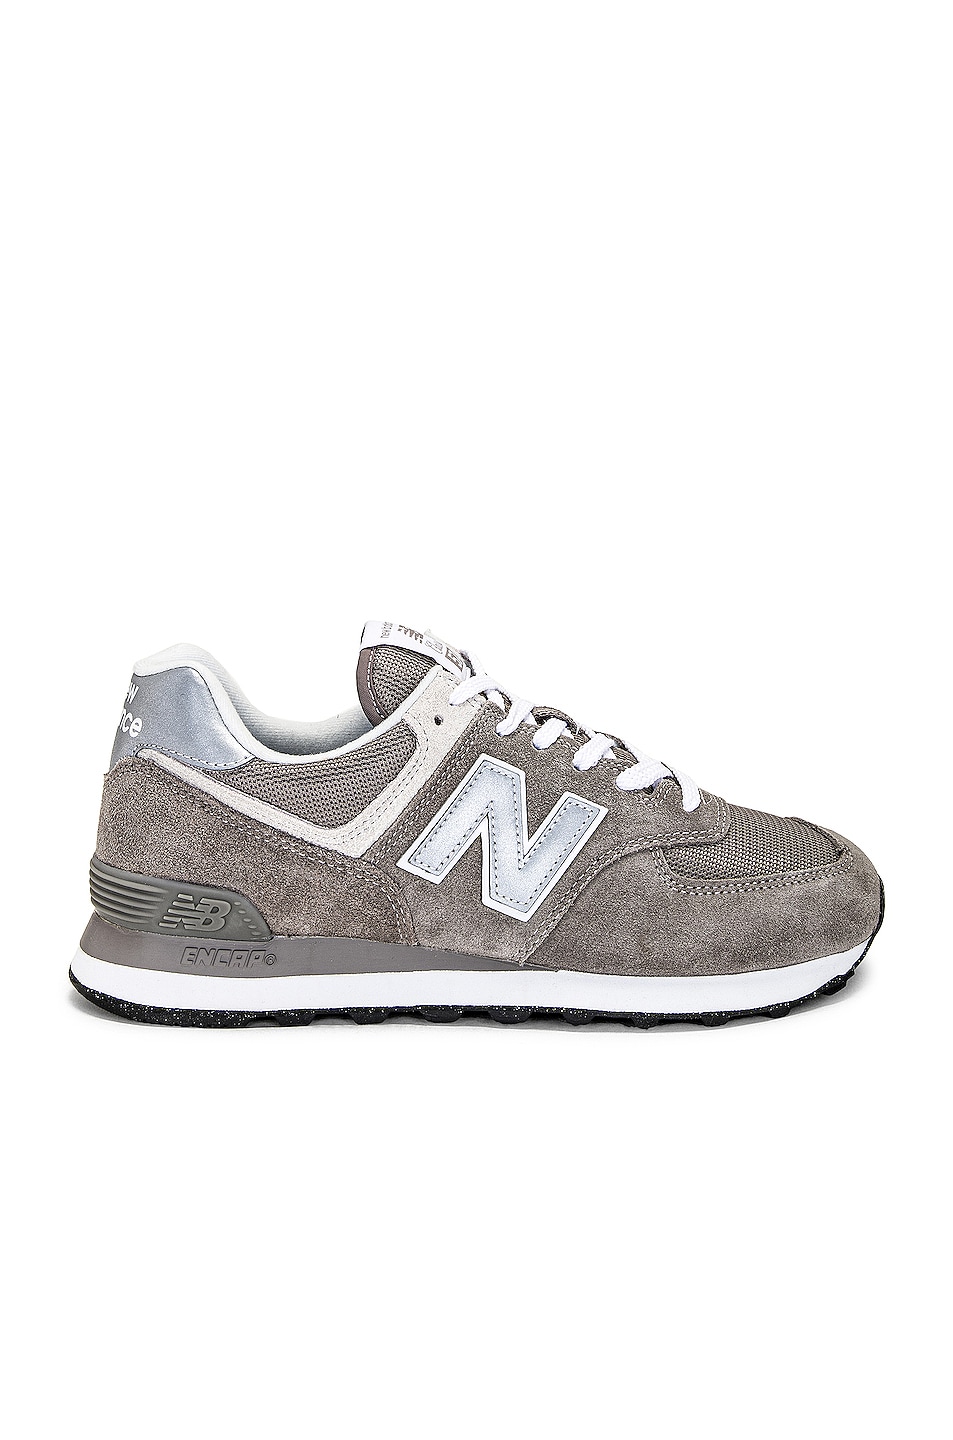 Image 1 of New Balance 574 Sneaker in Grey & White